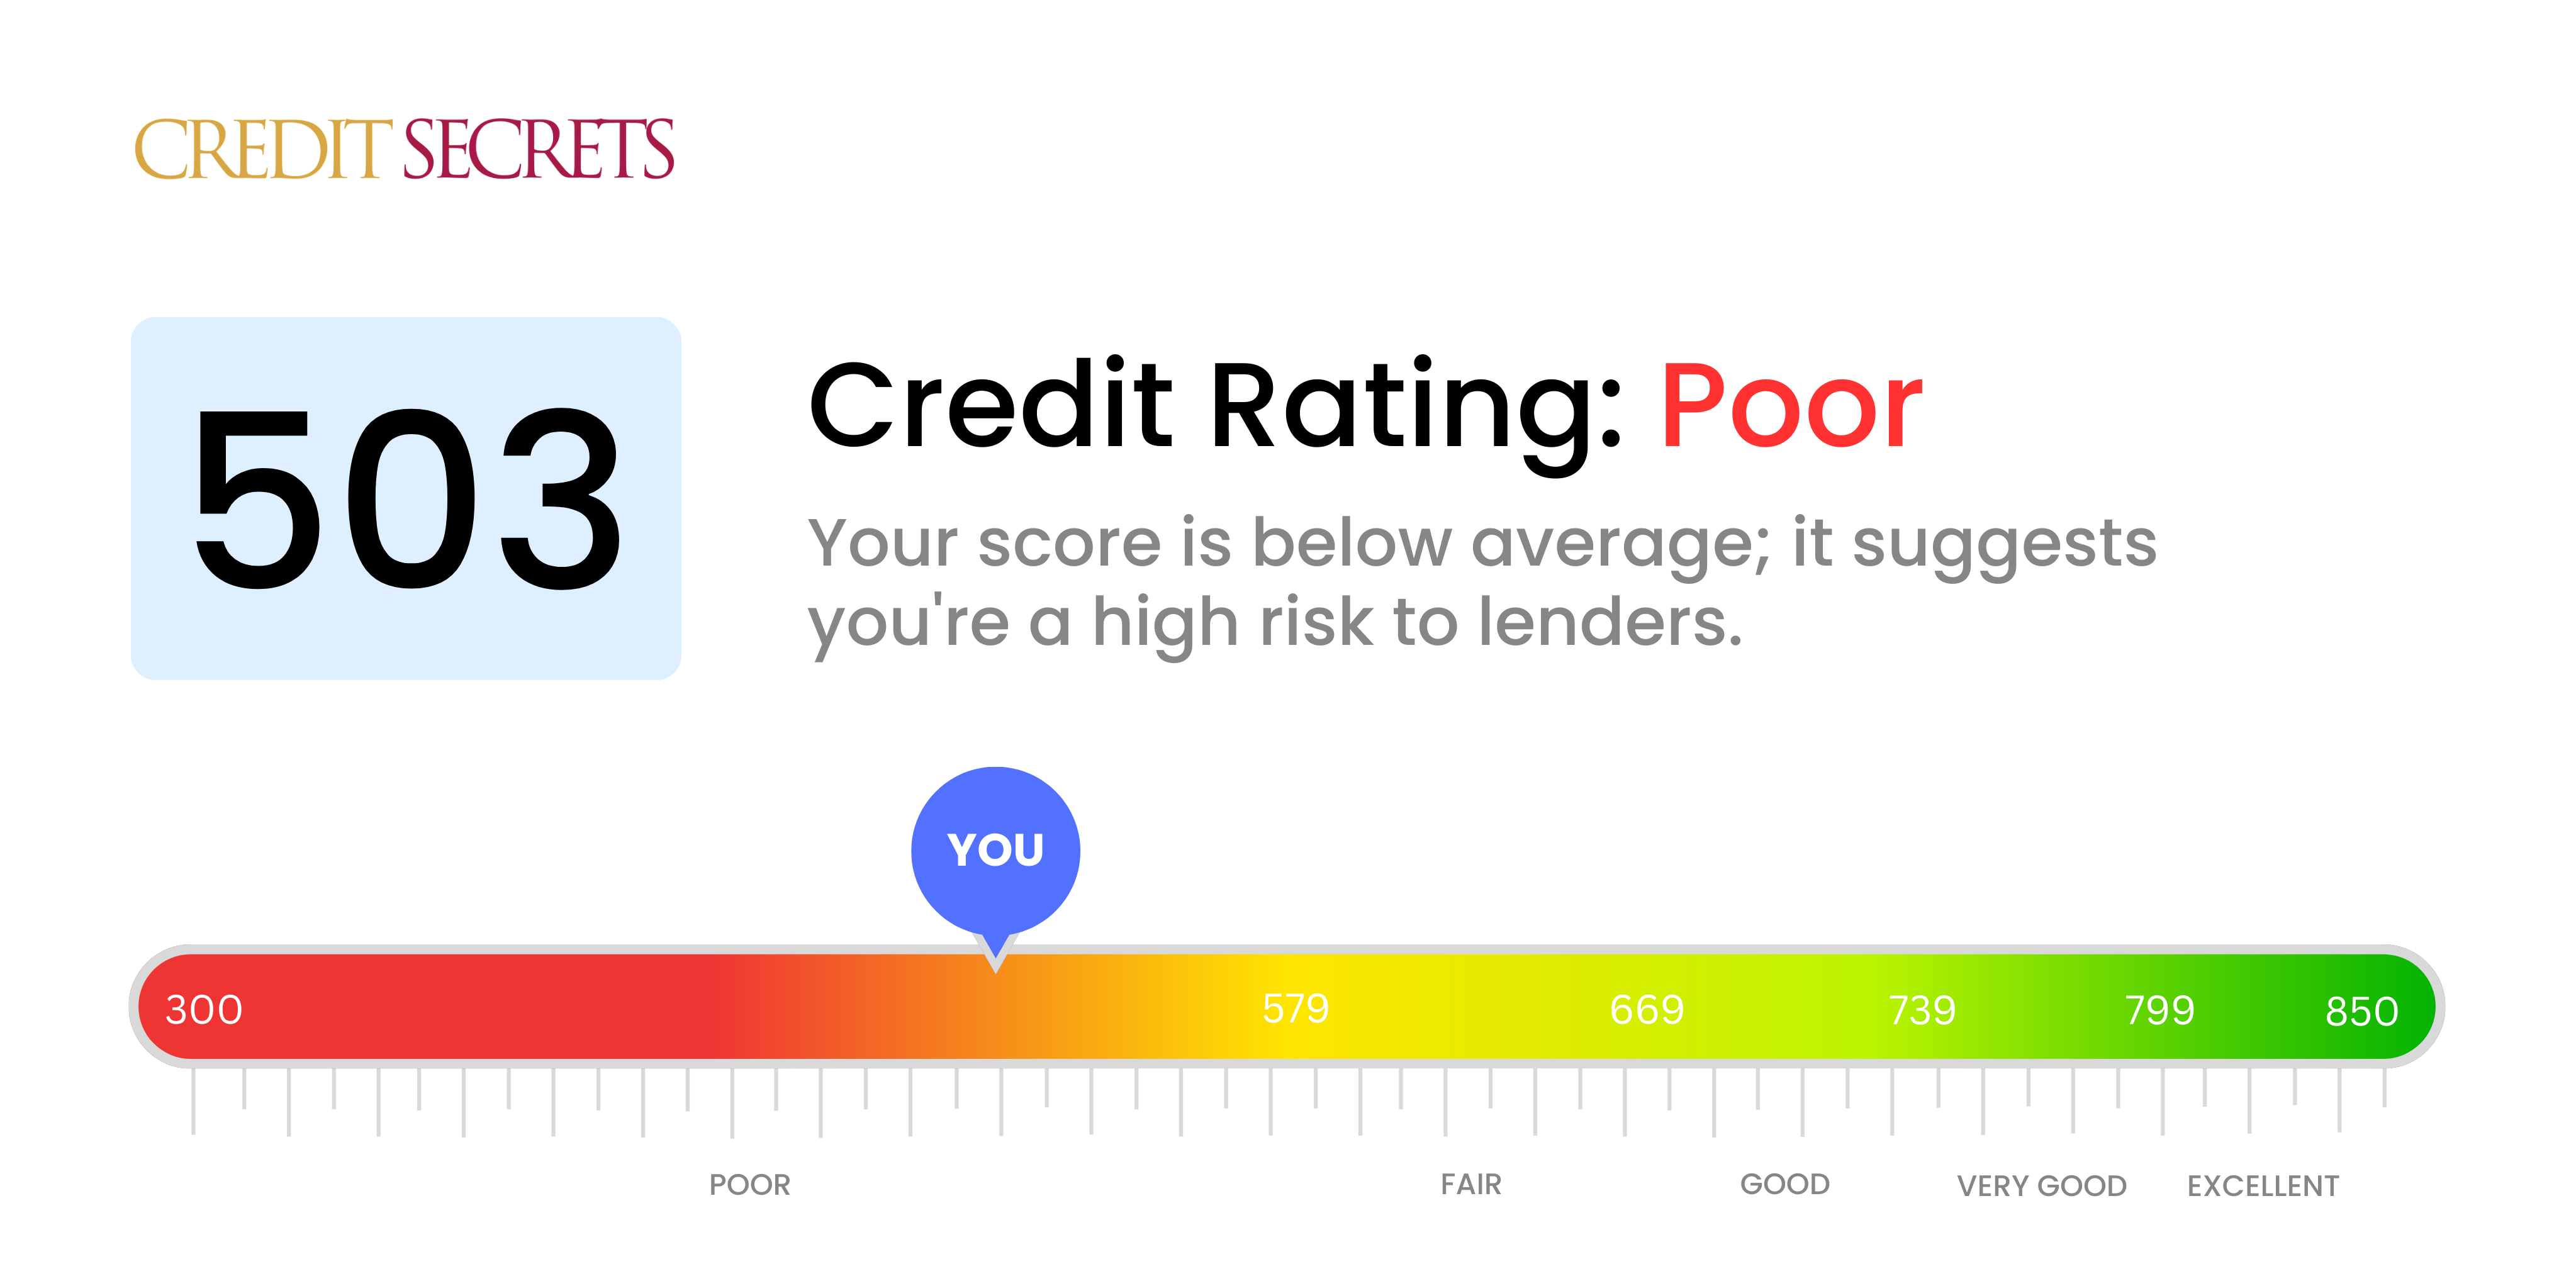 Is 503 a good credit score?